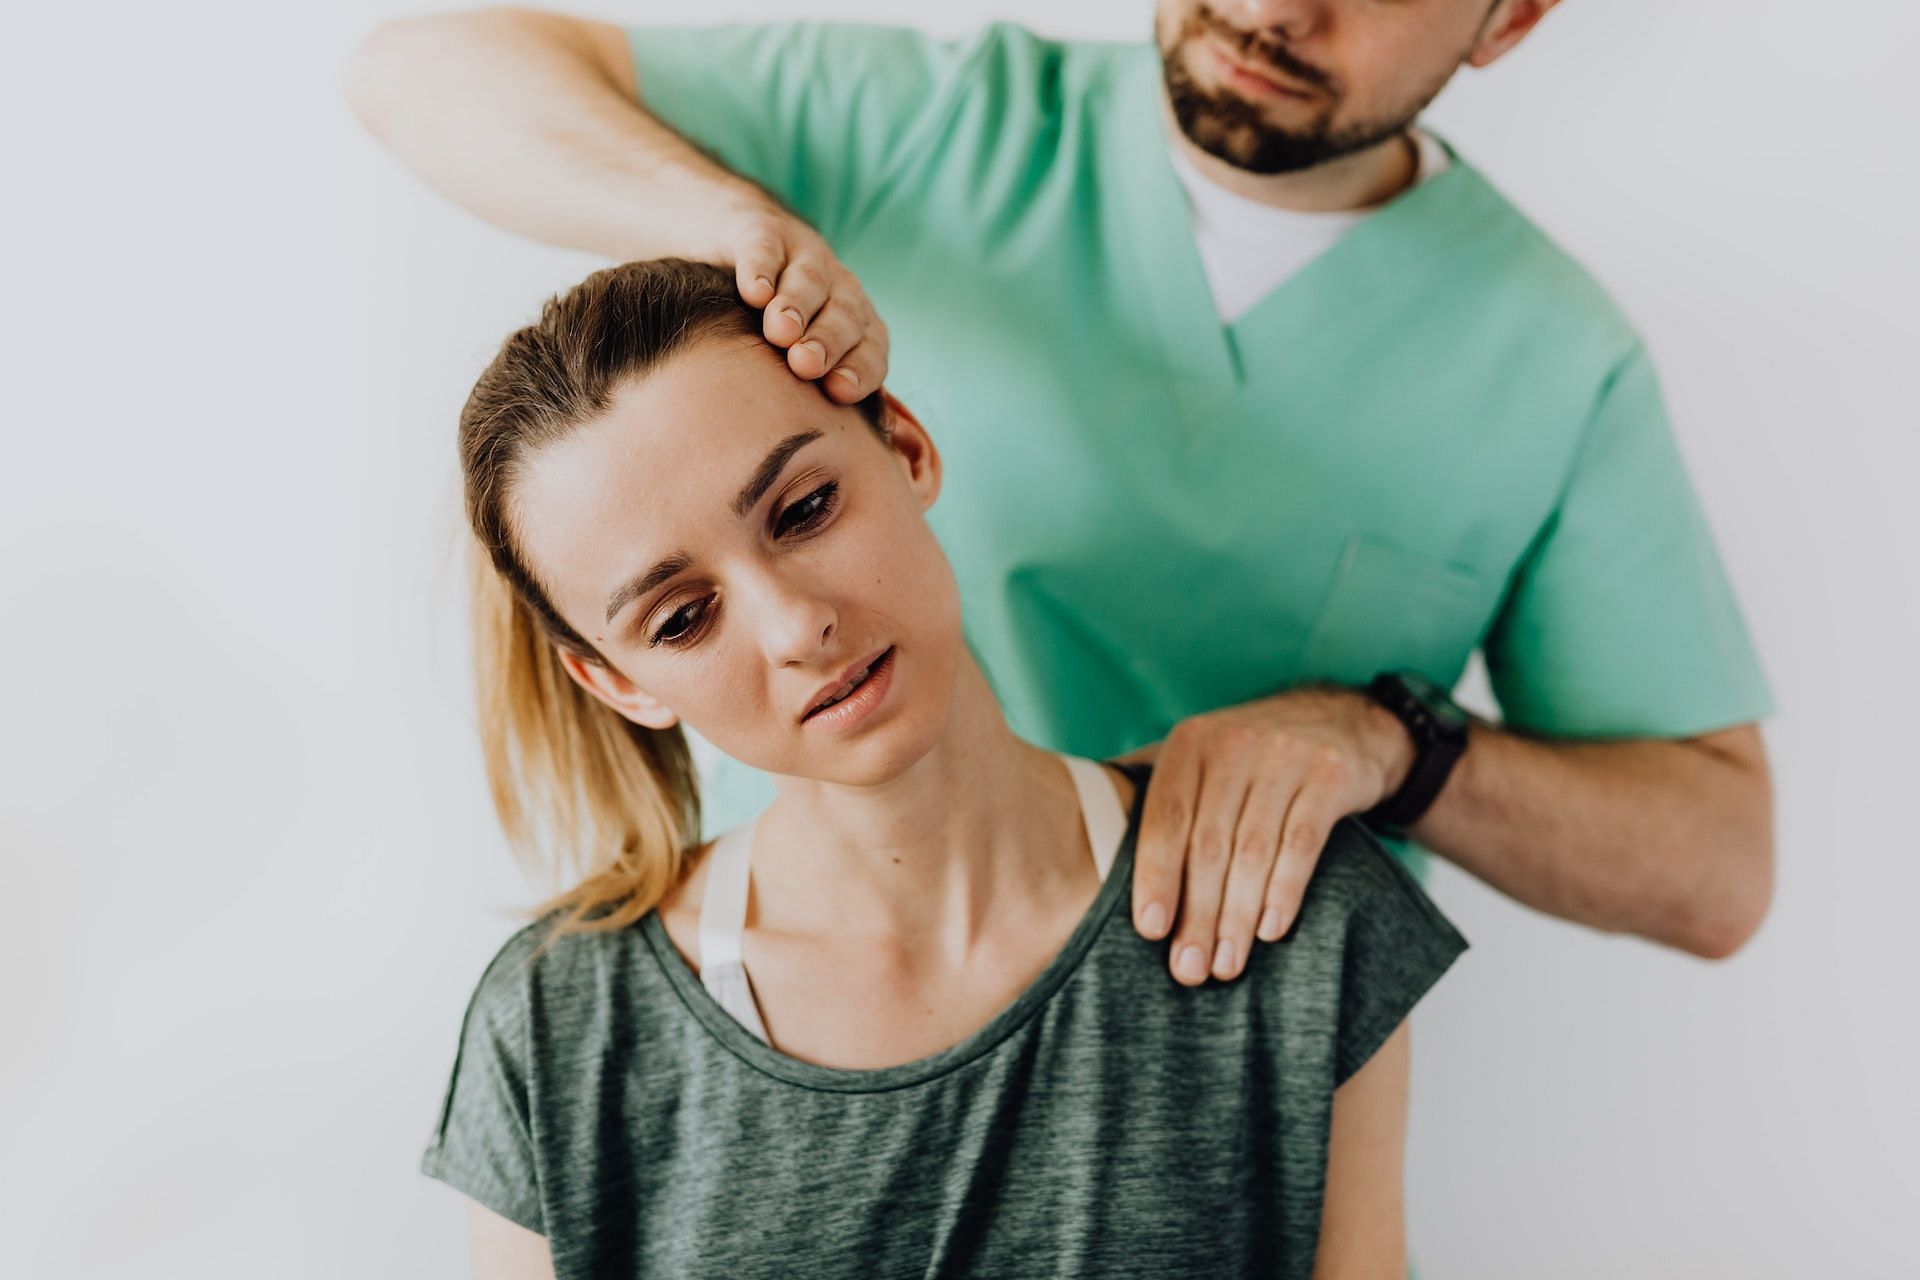 Physical therapies are beneficial for the treatment of muscle strain the neck. (Photo via Pexels/Karolina Grabowska)